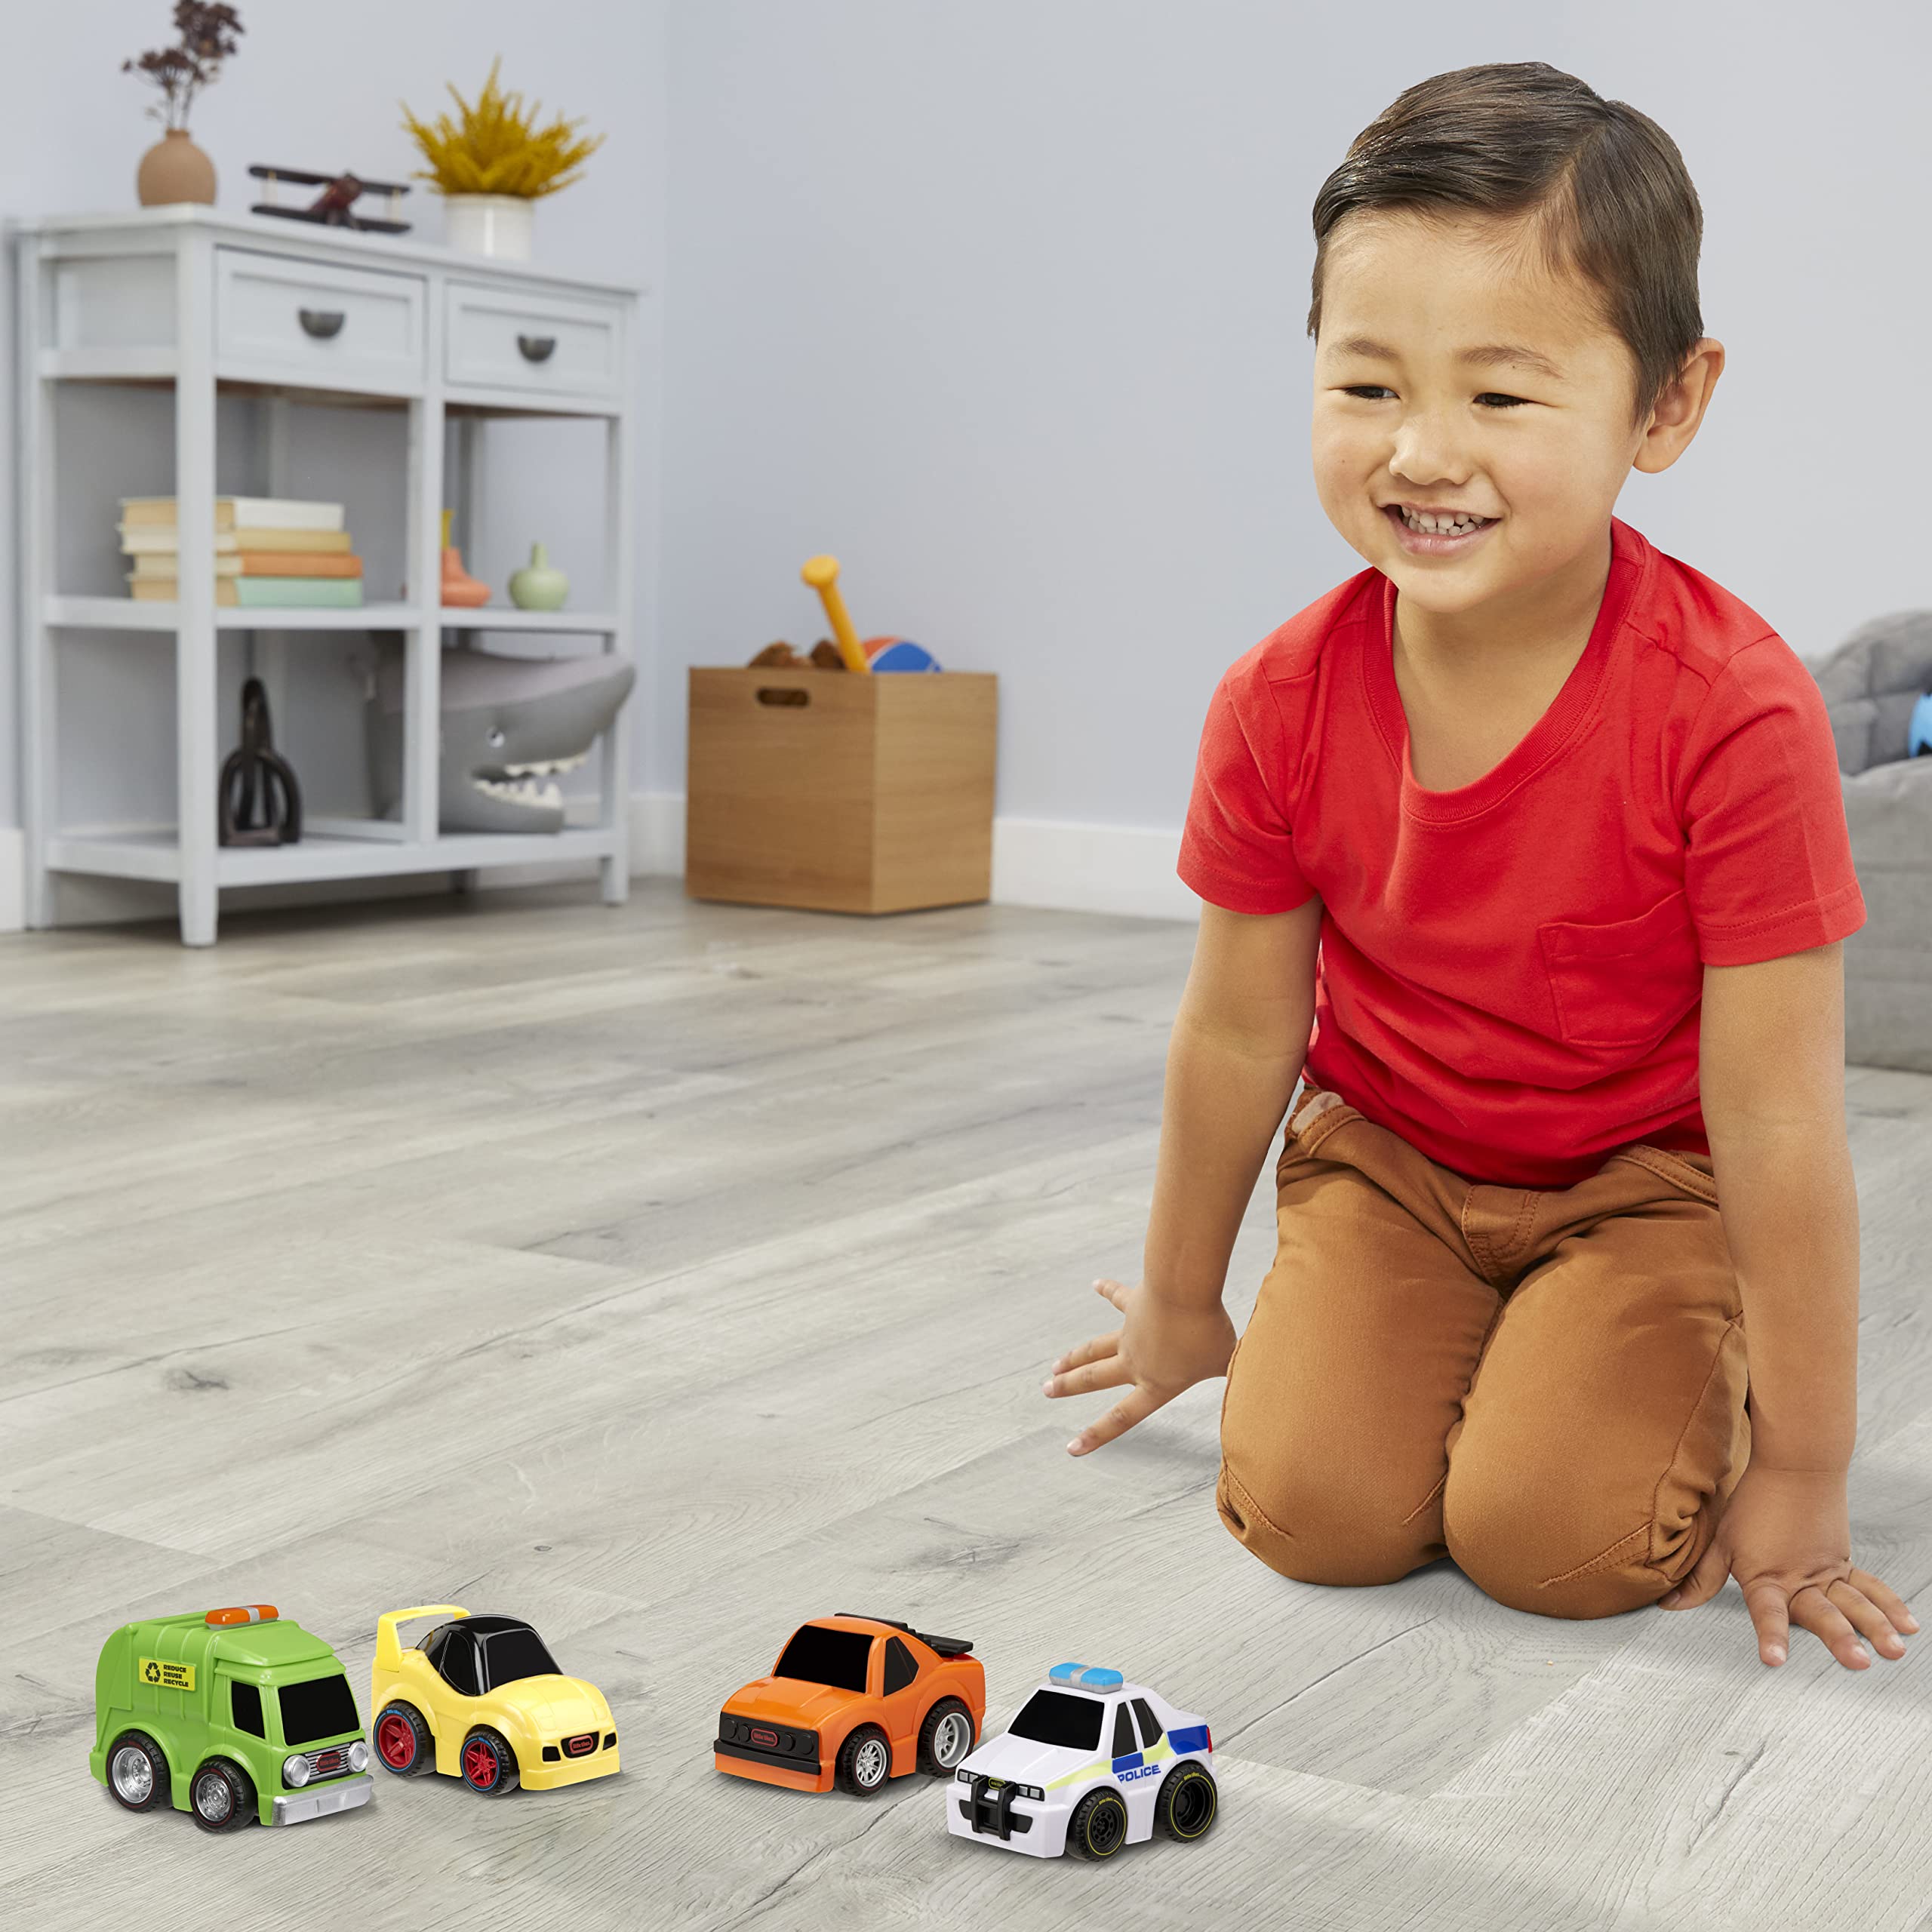 Little Tikes My First Cars Crazy Fast Cars 4-Pack Series 5 – Garbage Truck (Recycle), Race Car (Yellow), Muscle Car (Orange), Police Car (International), Pullback Toy Car Vehicles